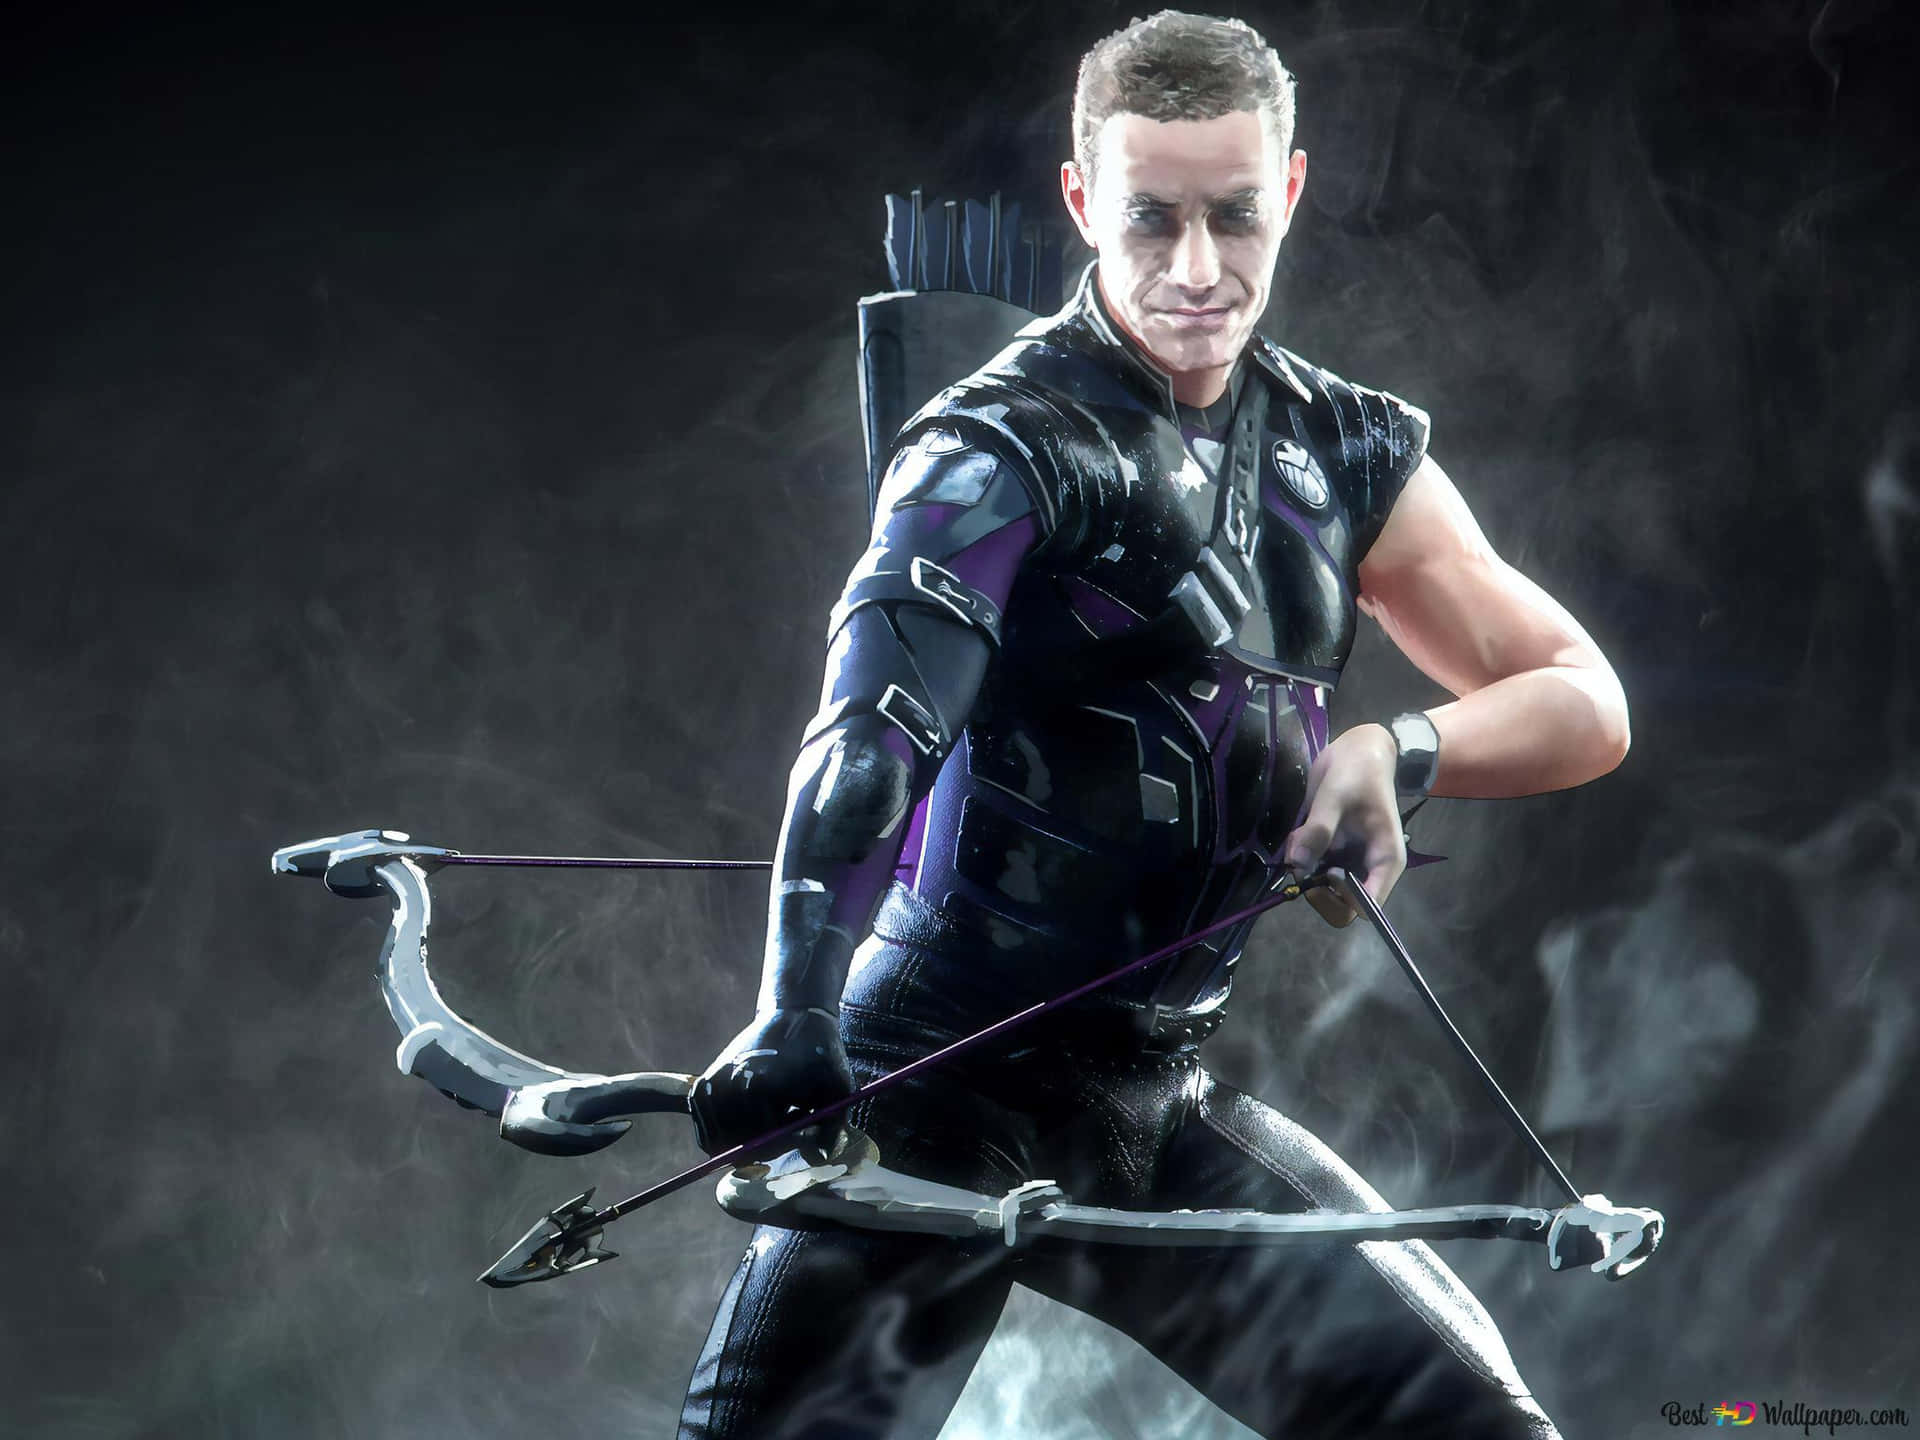 Hawkeye readying his bow for battle.